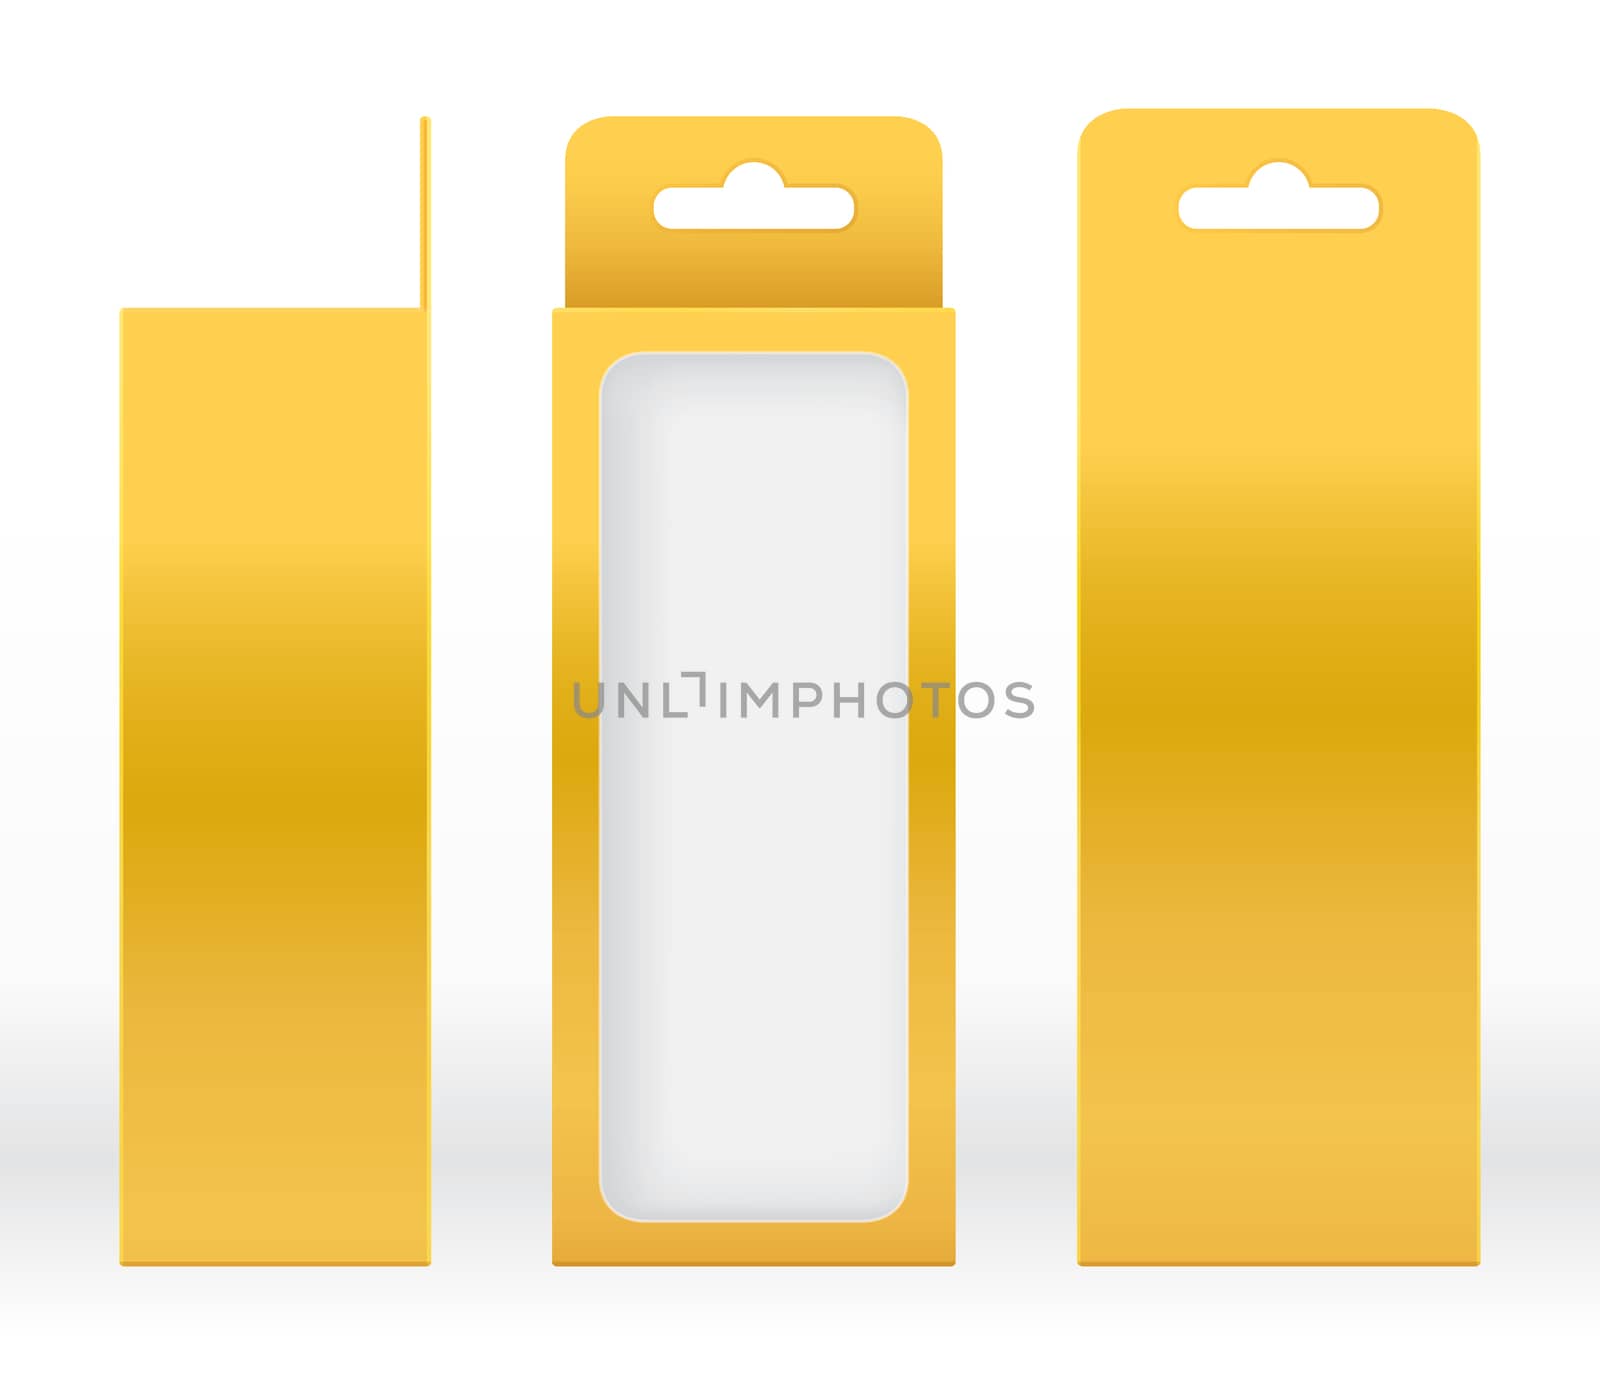 Hanging Box Gold window shape cut out Packaging Template blank. Luxury Empty Box Golden yellow Template for design product package gift box, Yellow Gold Box packaging paper kraft cardboard package